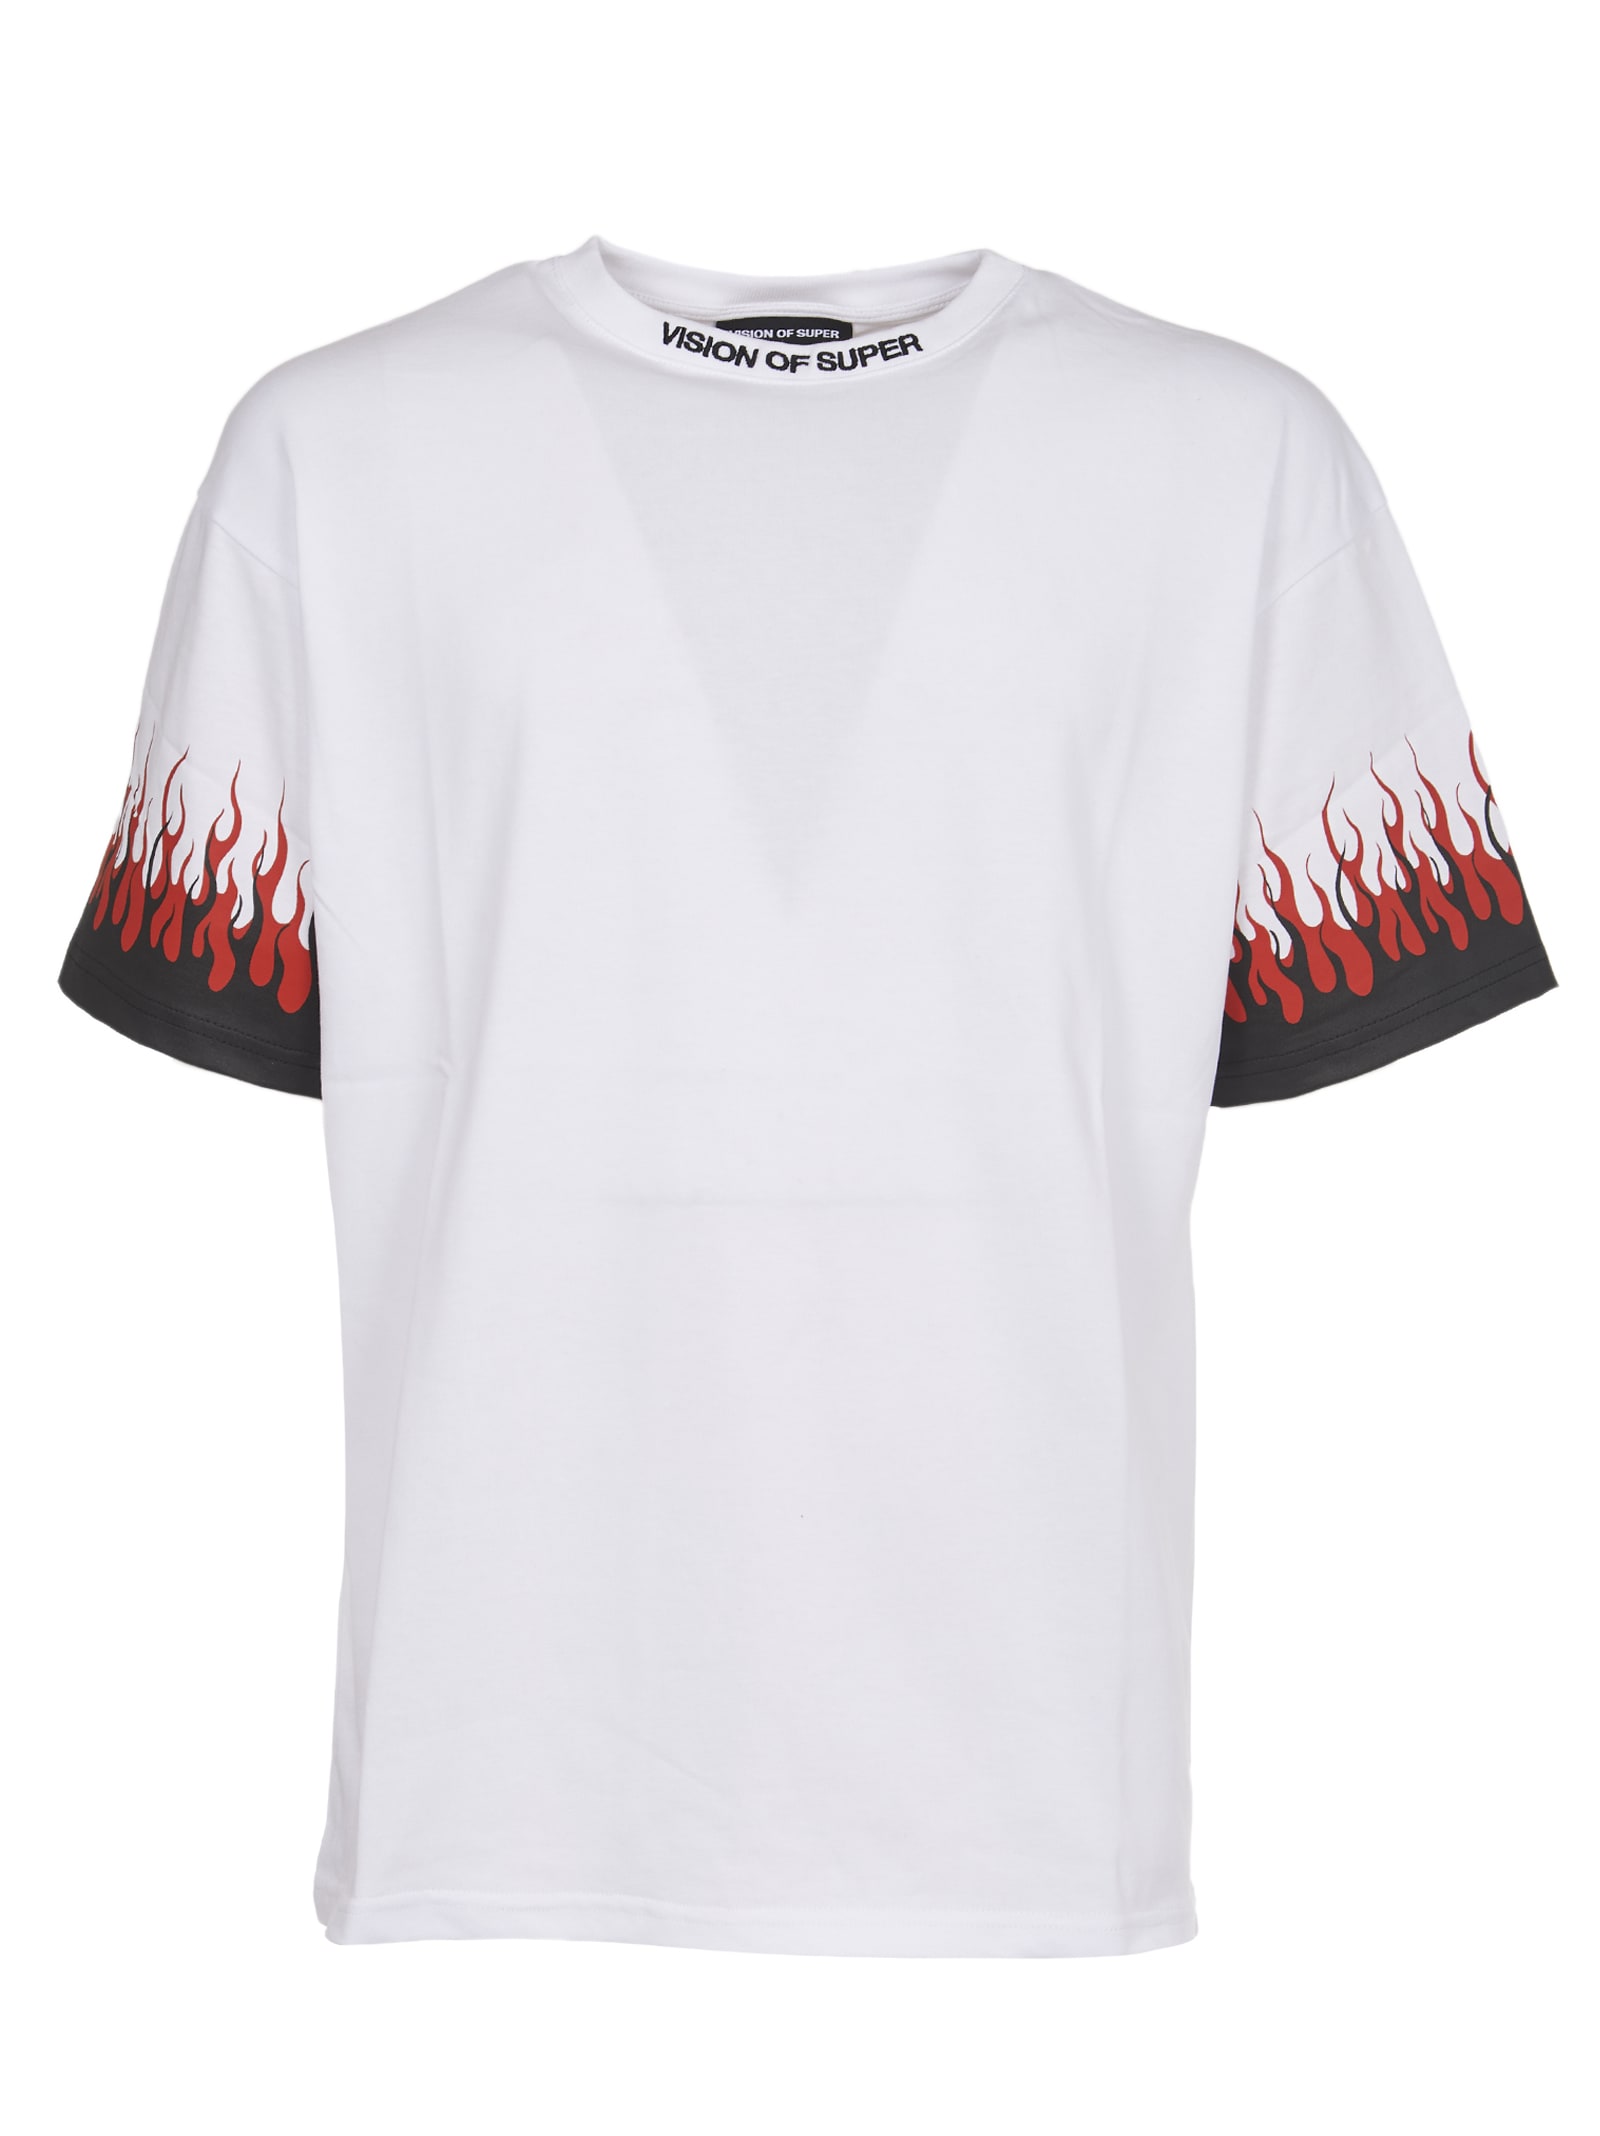 Vision of Super Black And Red Flames T-shirt